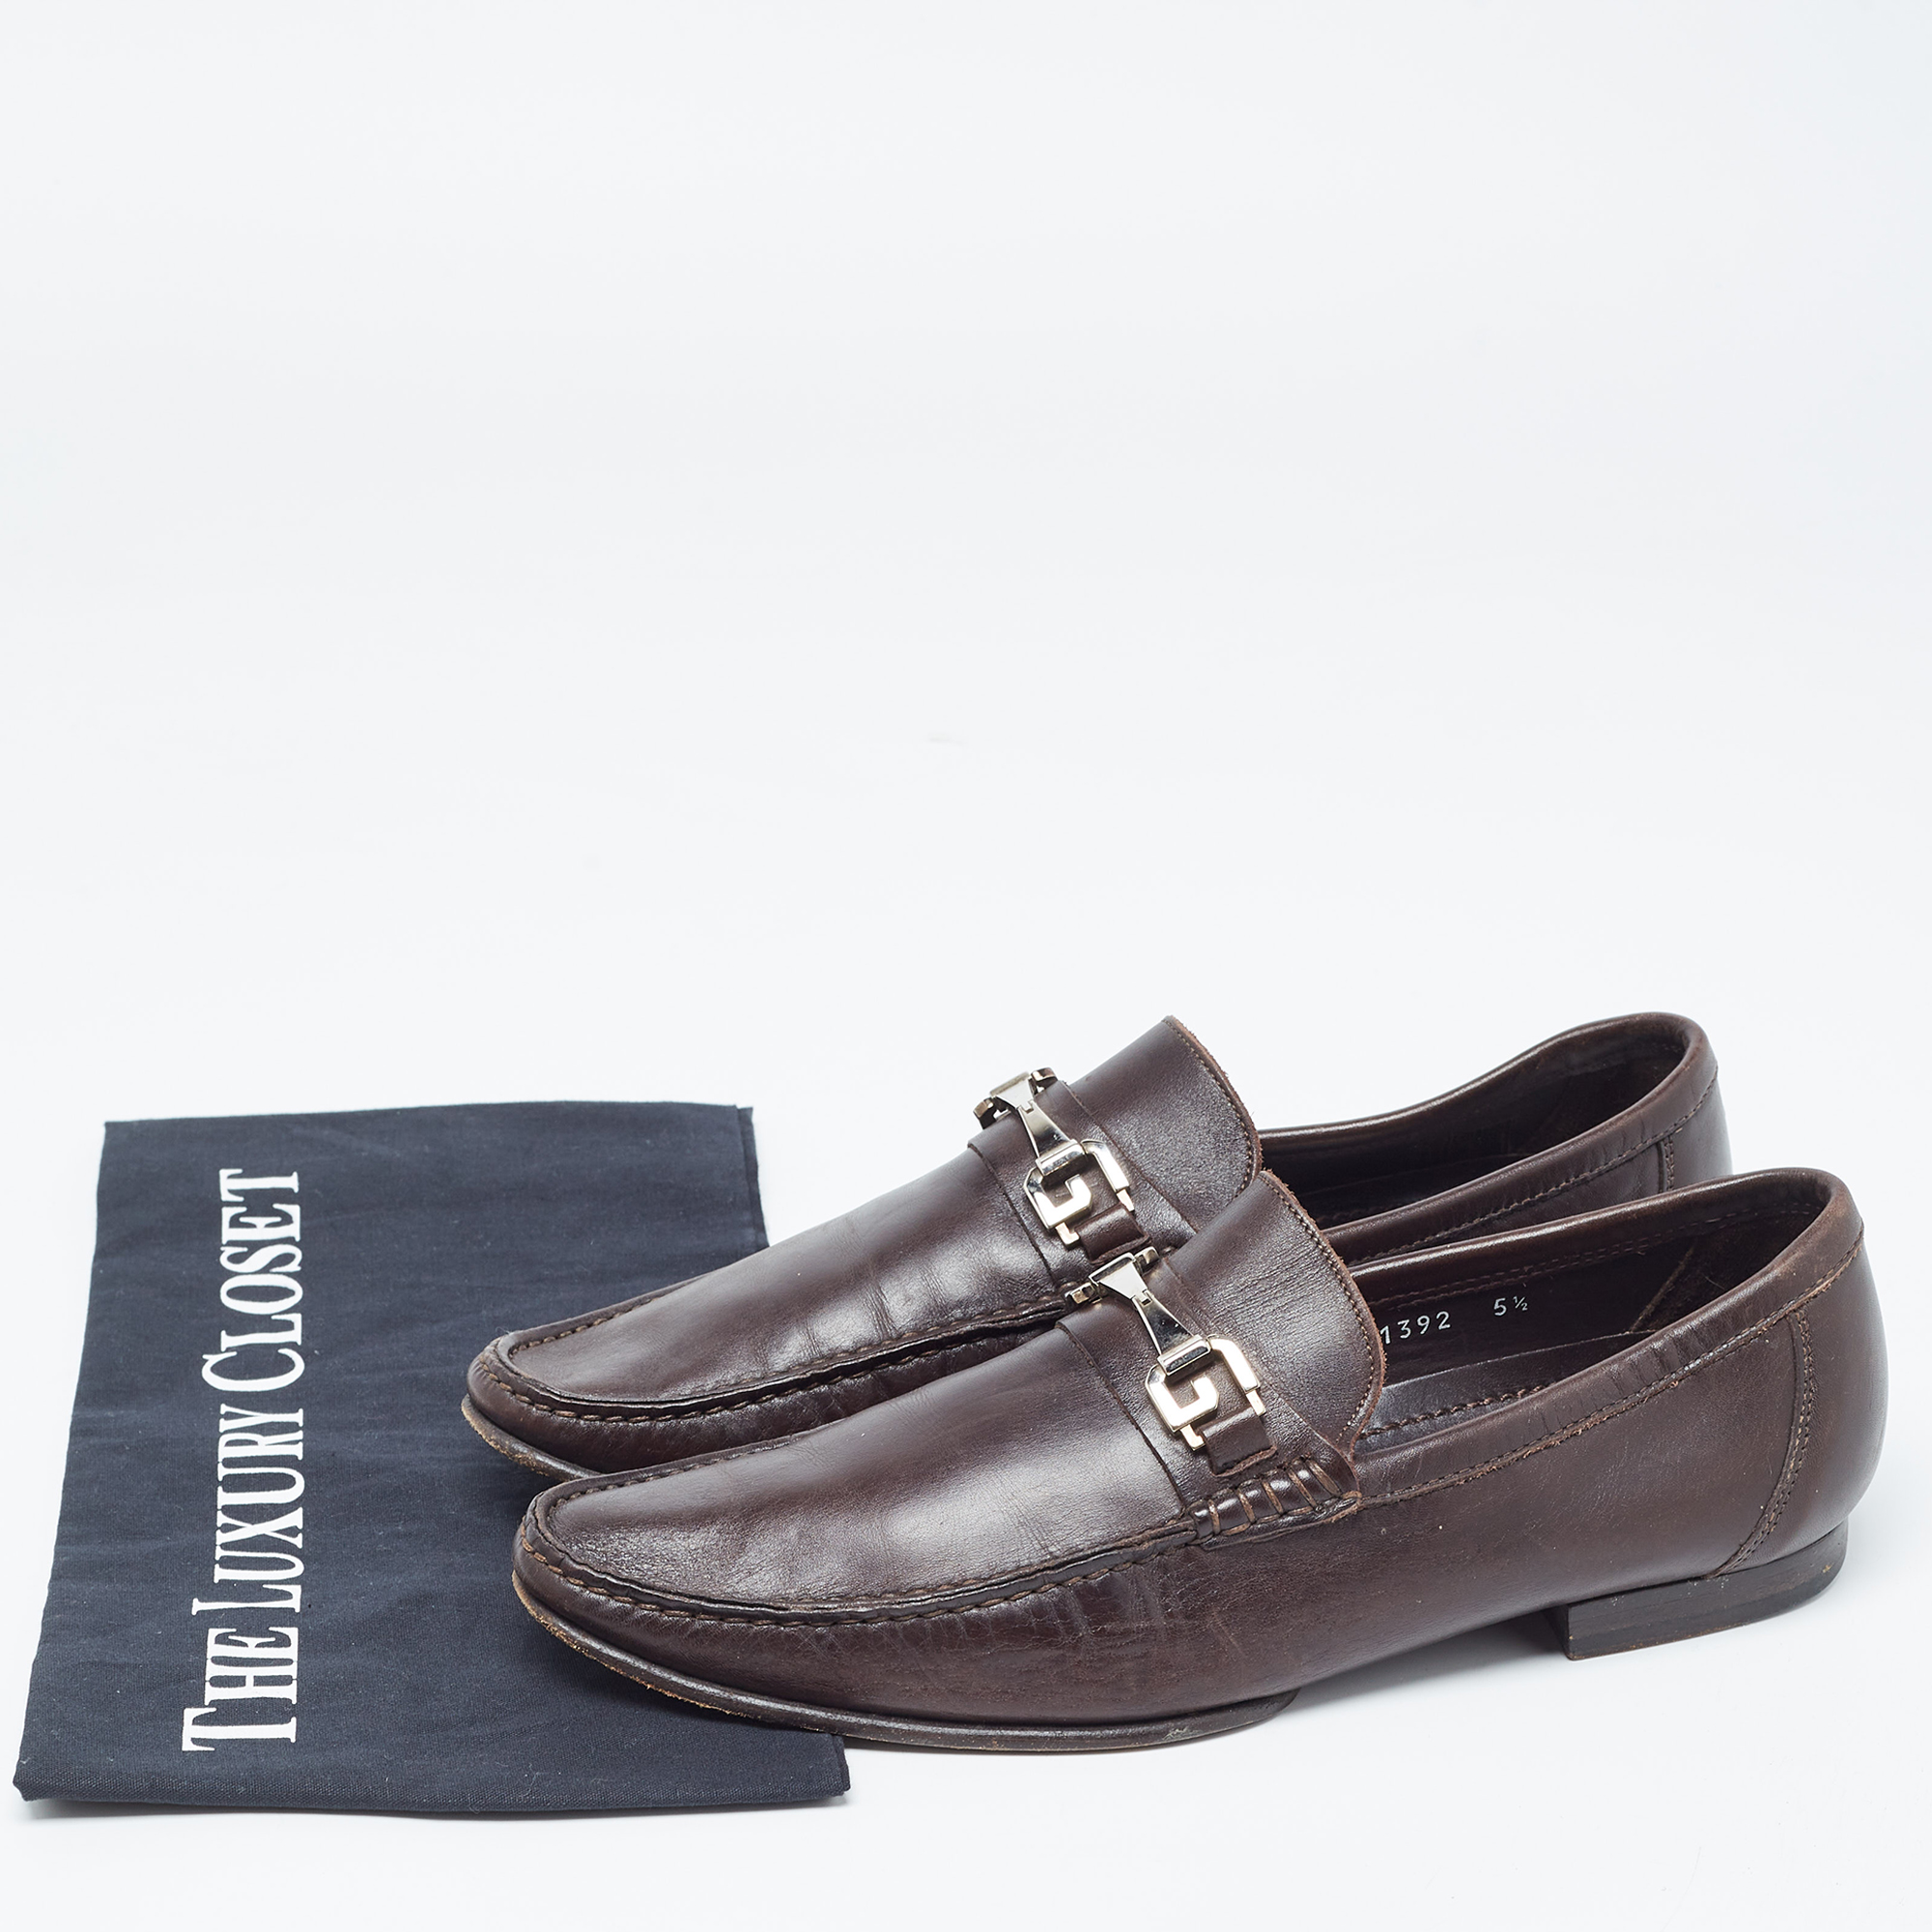 Dolce & Gabbana Brown Leather Penny Loafers Size 39.5